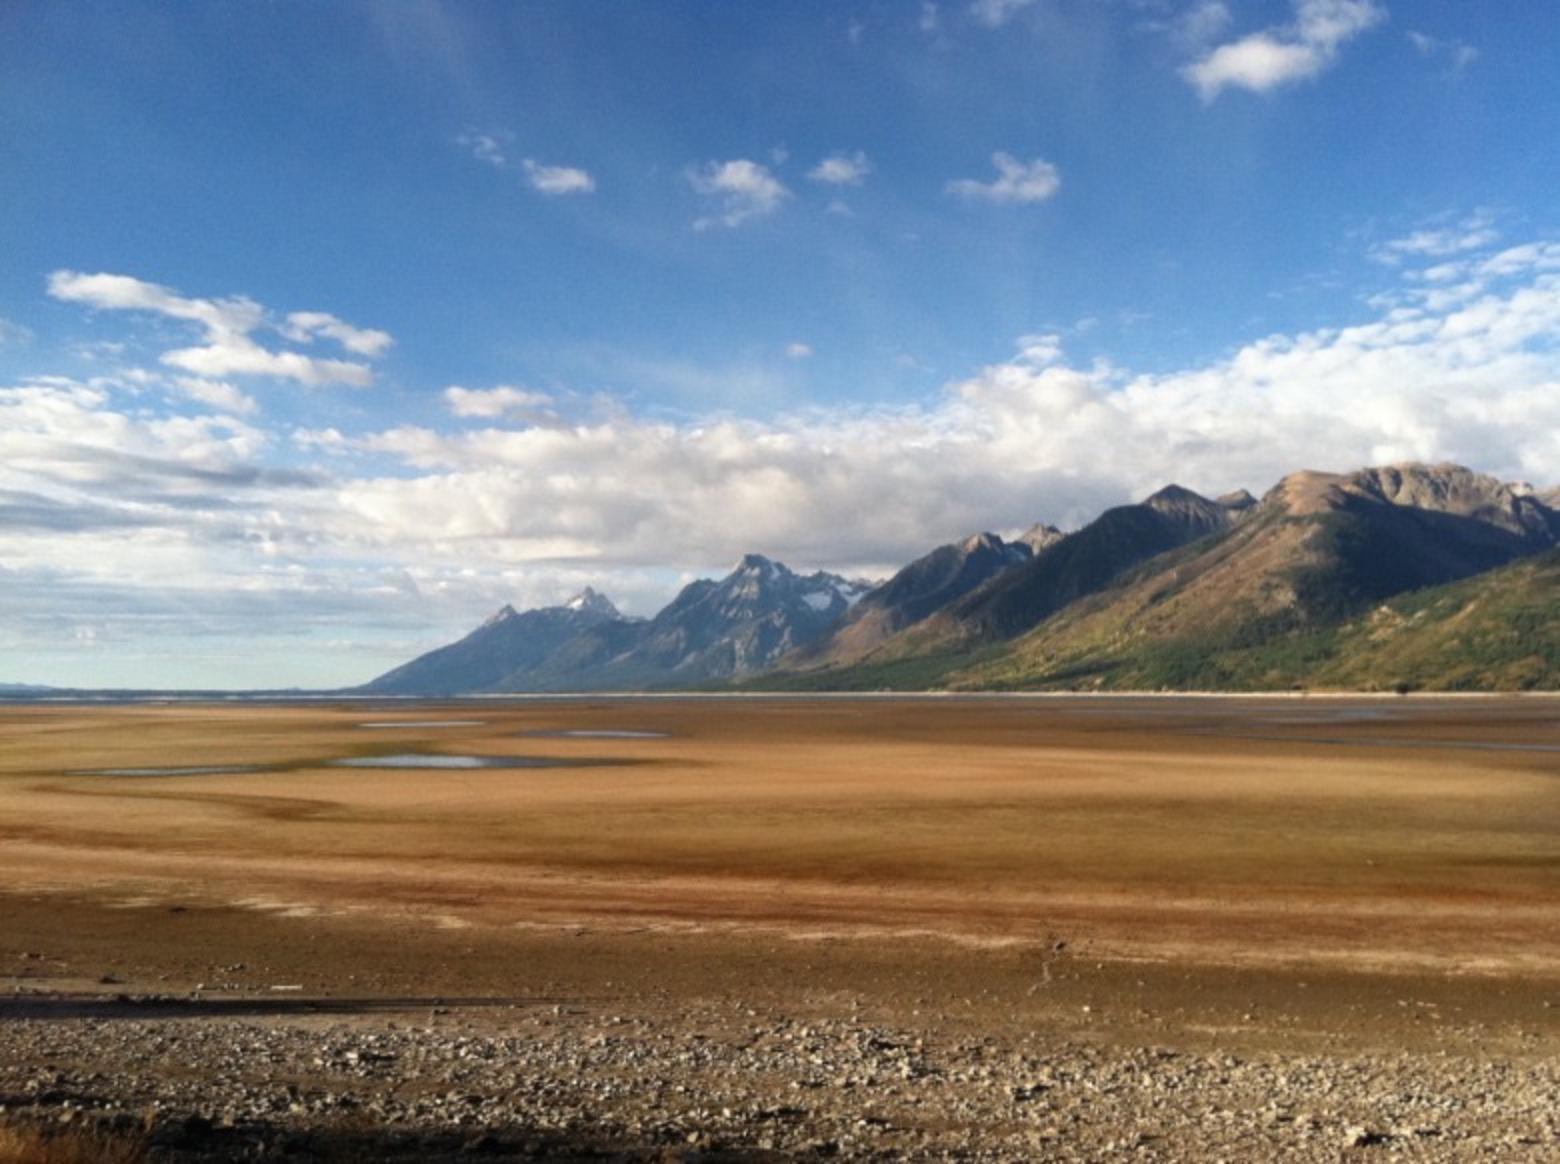 Jackson Lake in Grand Teton National Park, drained of its reach in a low precipitation summer and when downstream water users in Idaho—potato farmers—exercised their water rights to flows in the Snake River. Photo by Todd Wilkinson